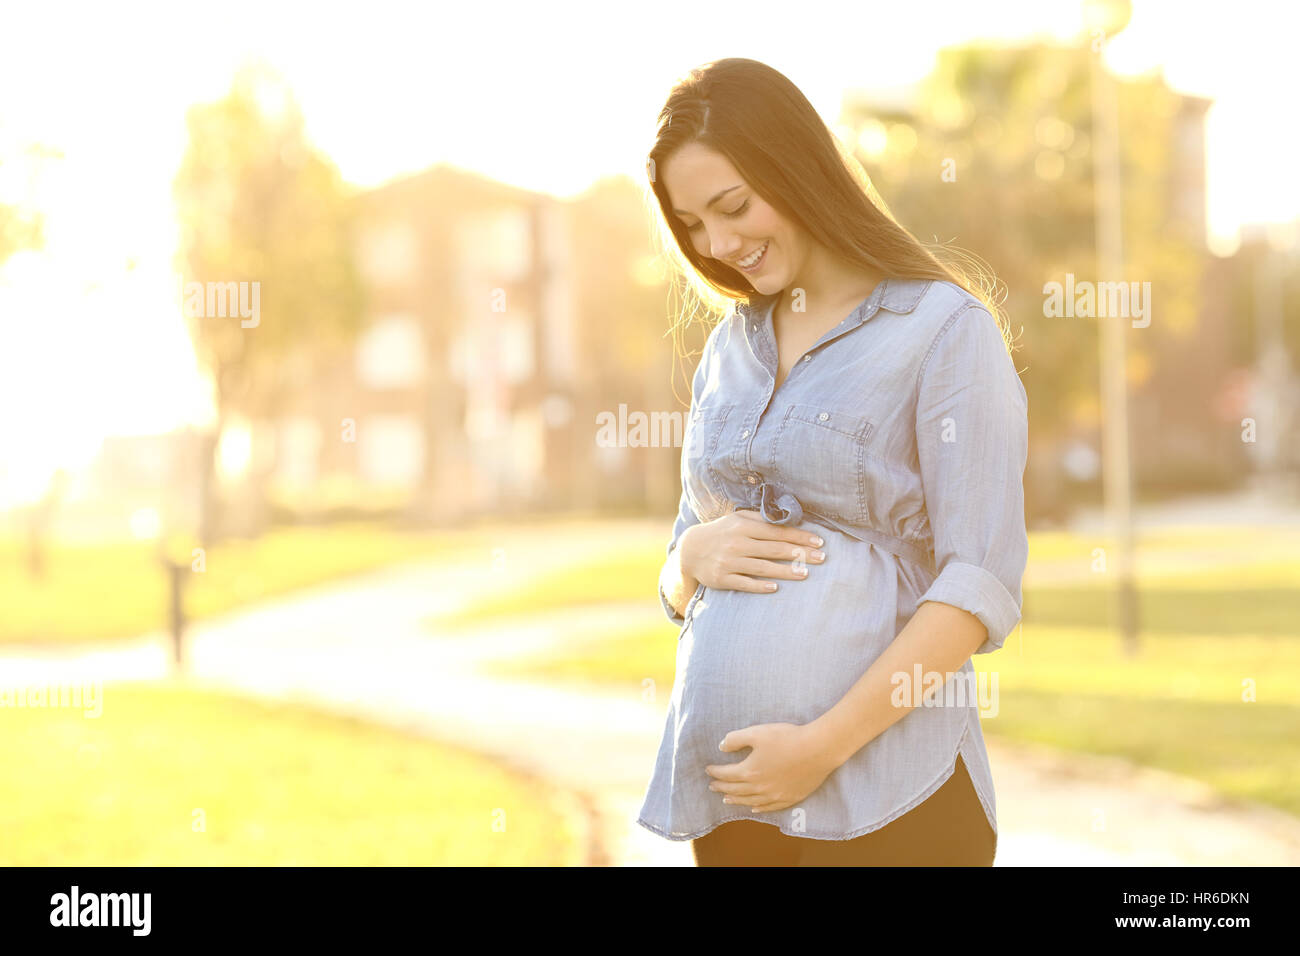 Portrait of a happy and proud pregnant woman looking at her belly in a park at sunrise with a warm back light in the background Stock Photo